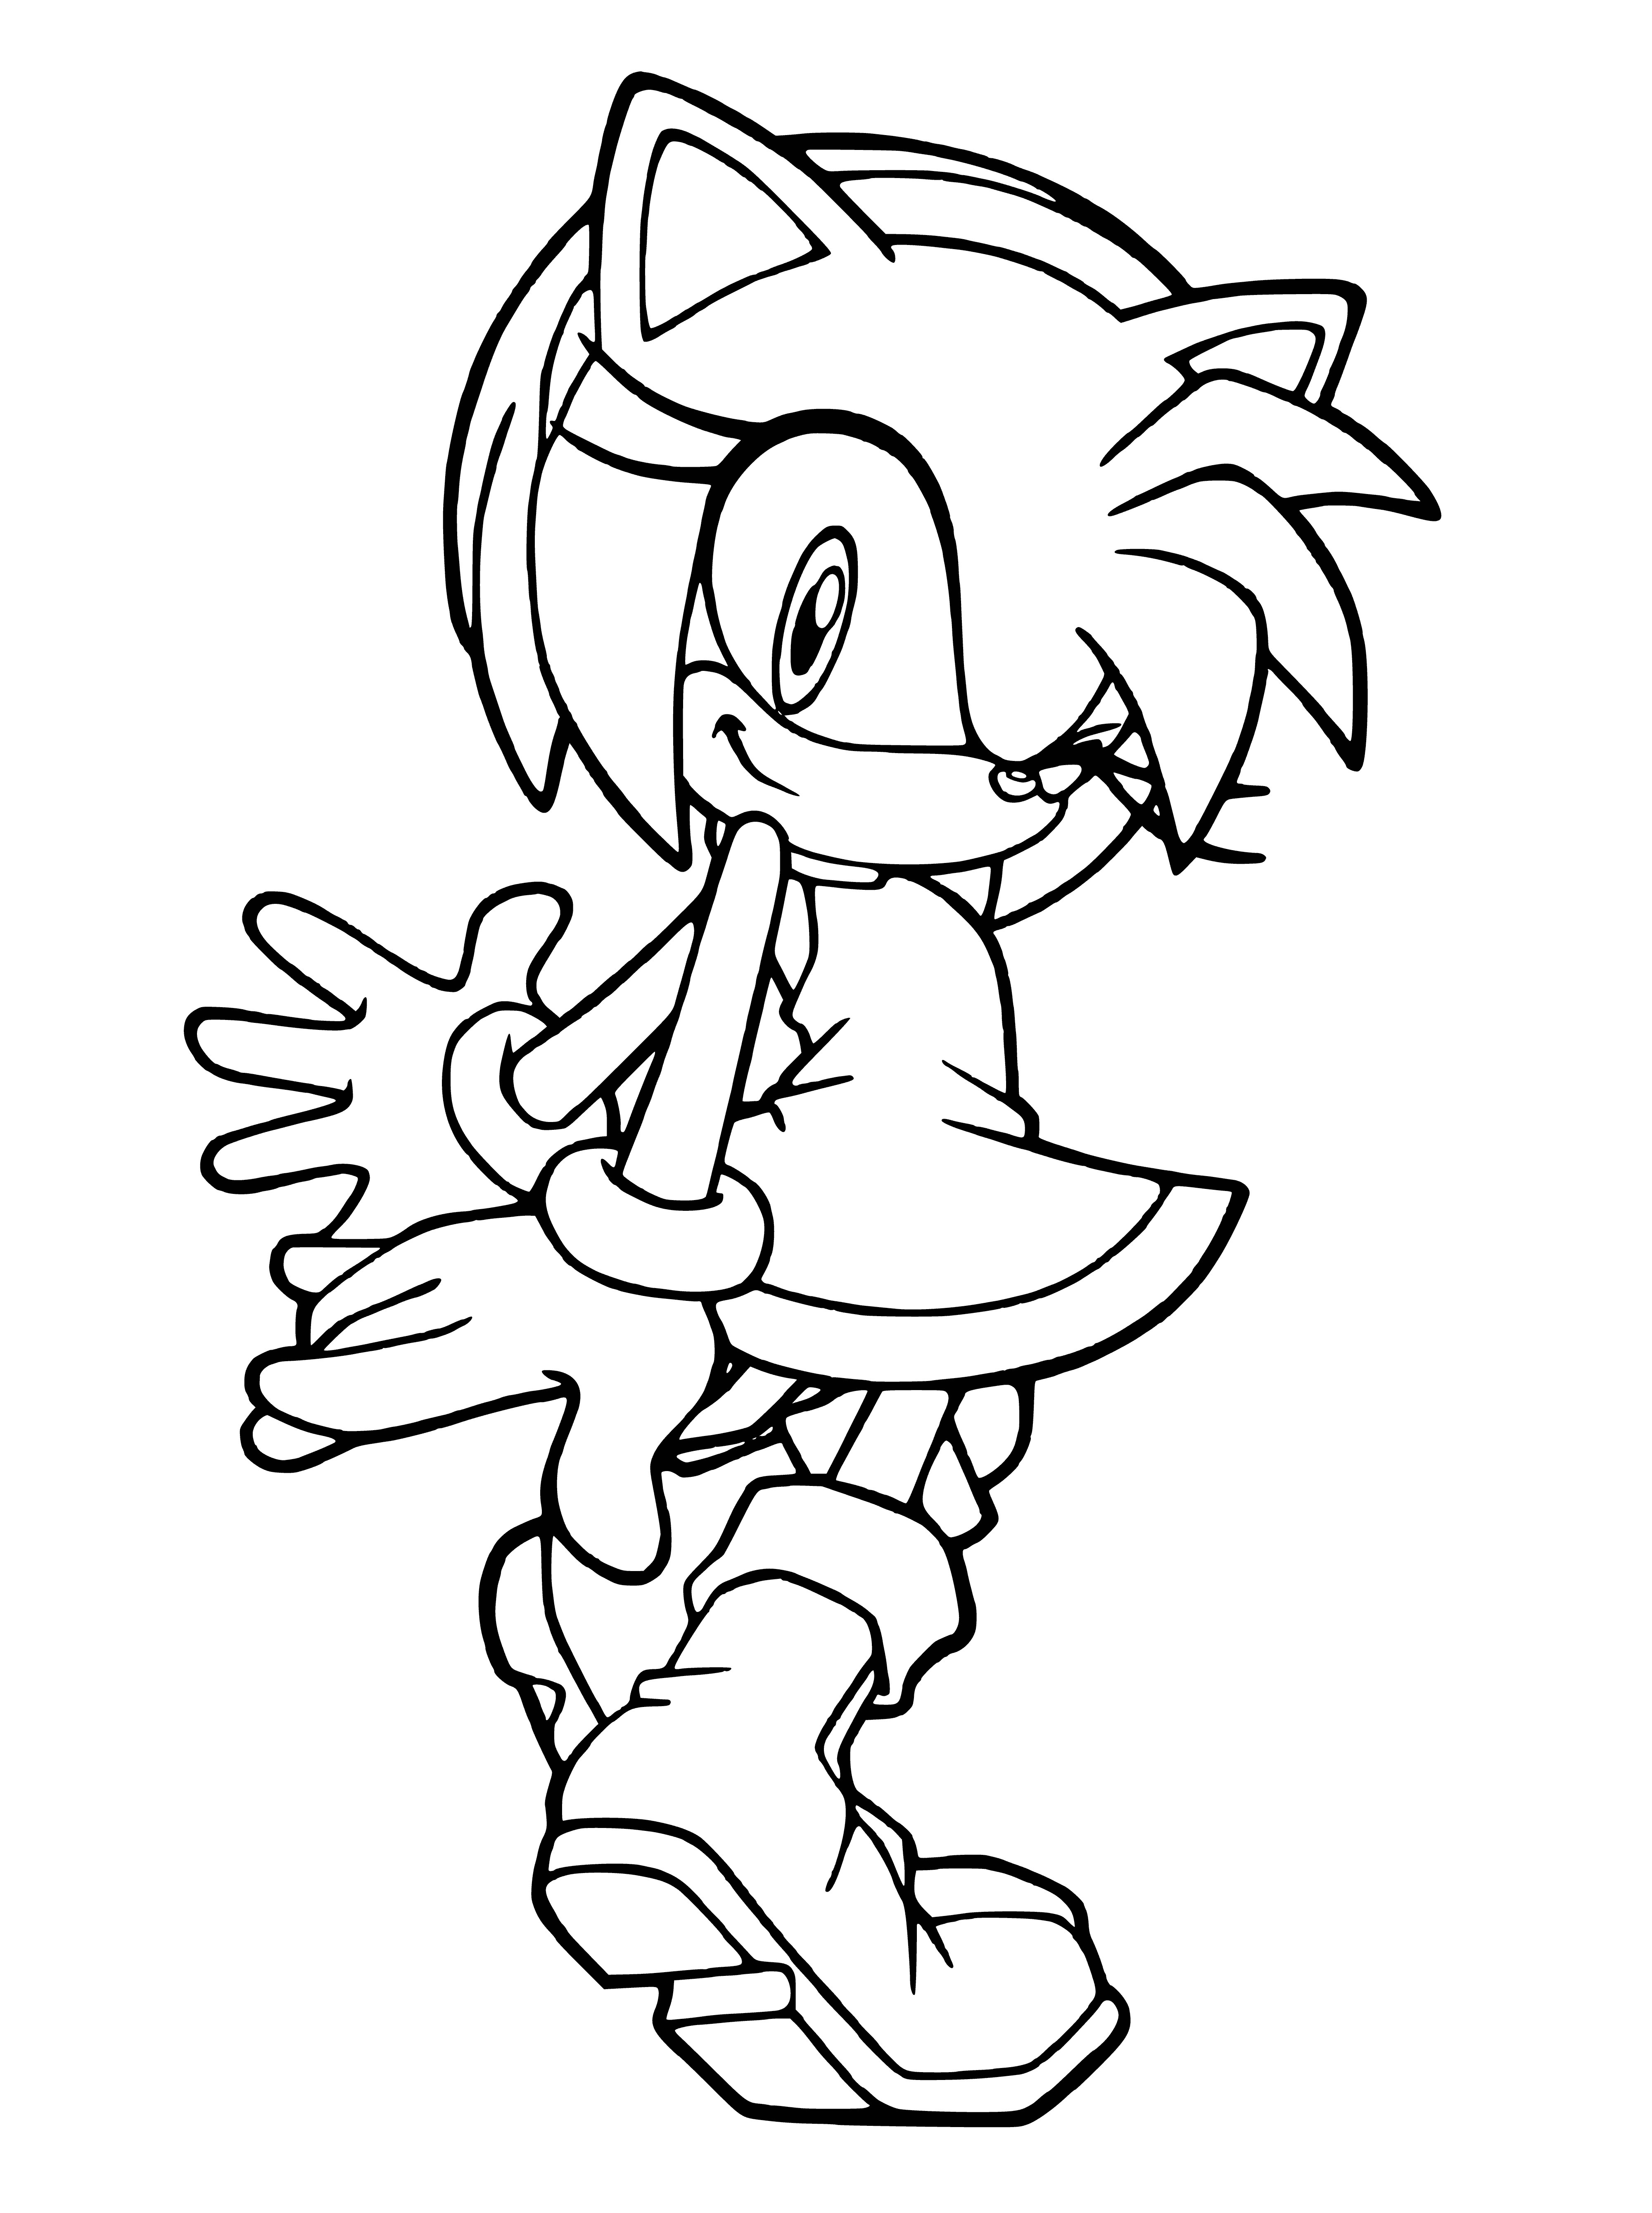 Amy Rose coloring page